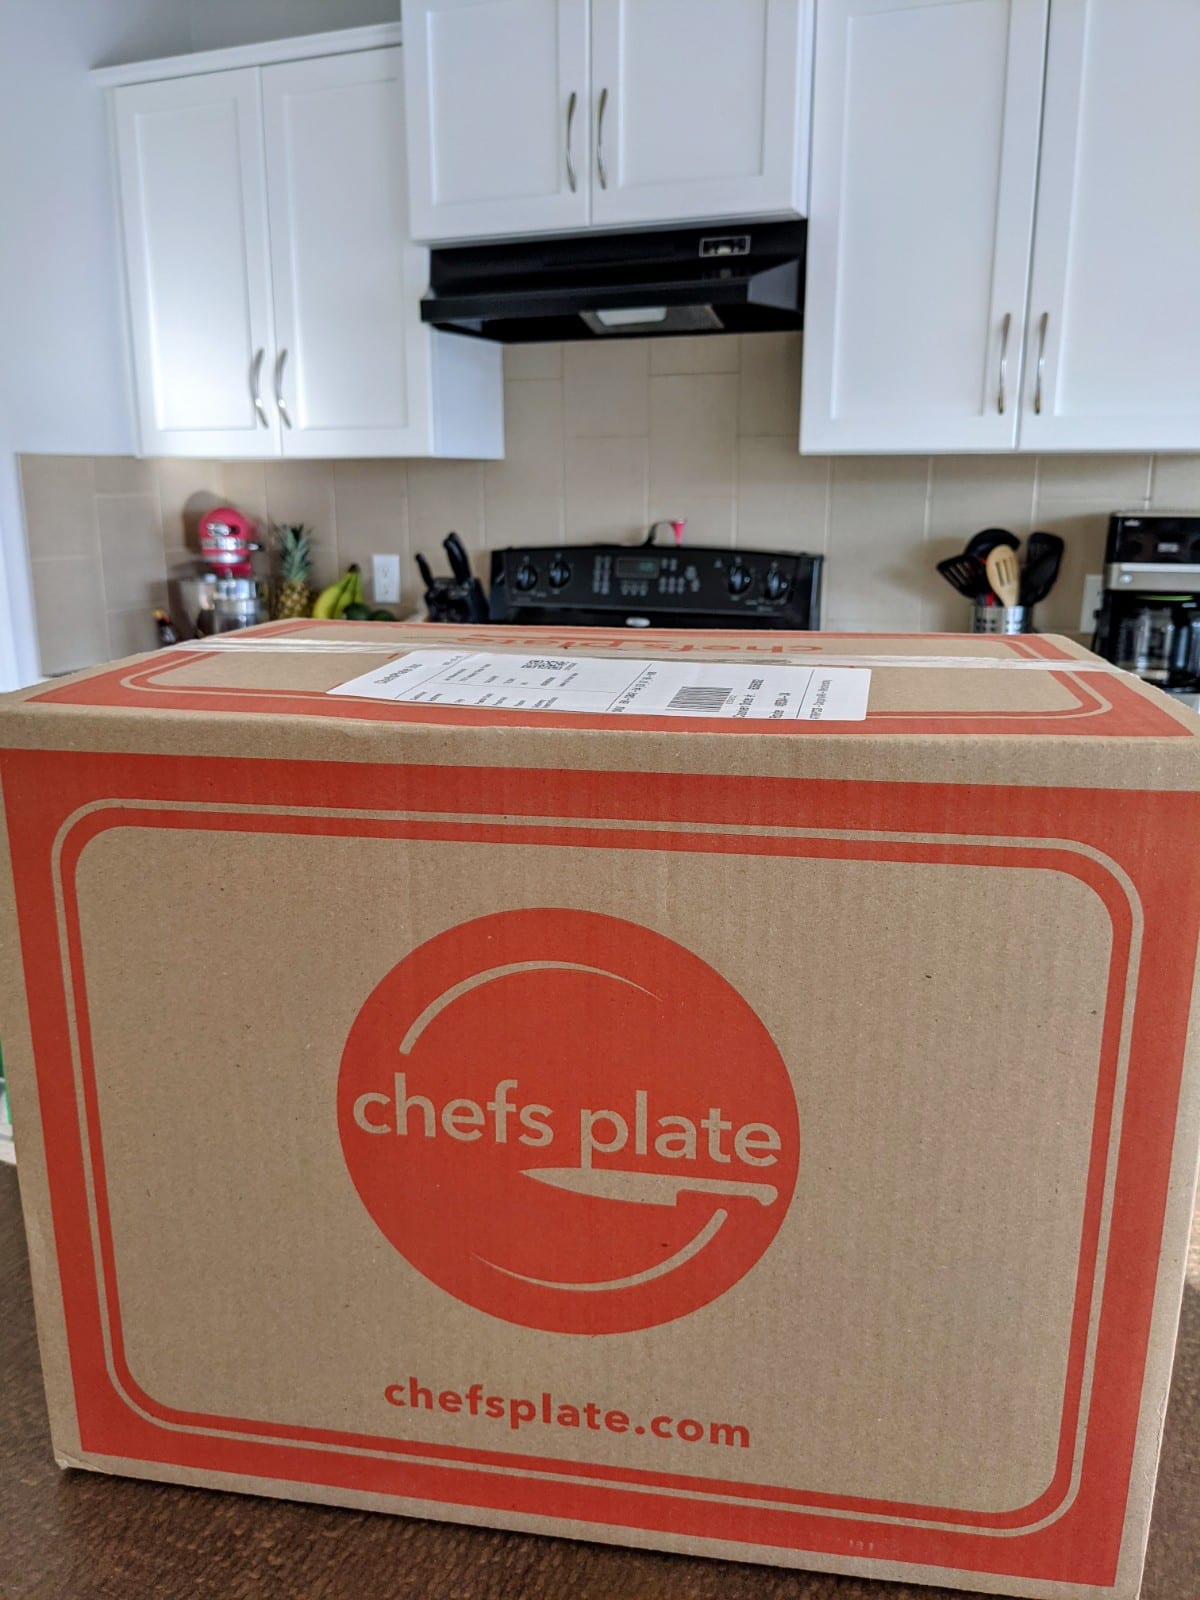 Chefs Plate Review & Coupons!